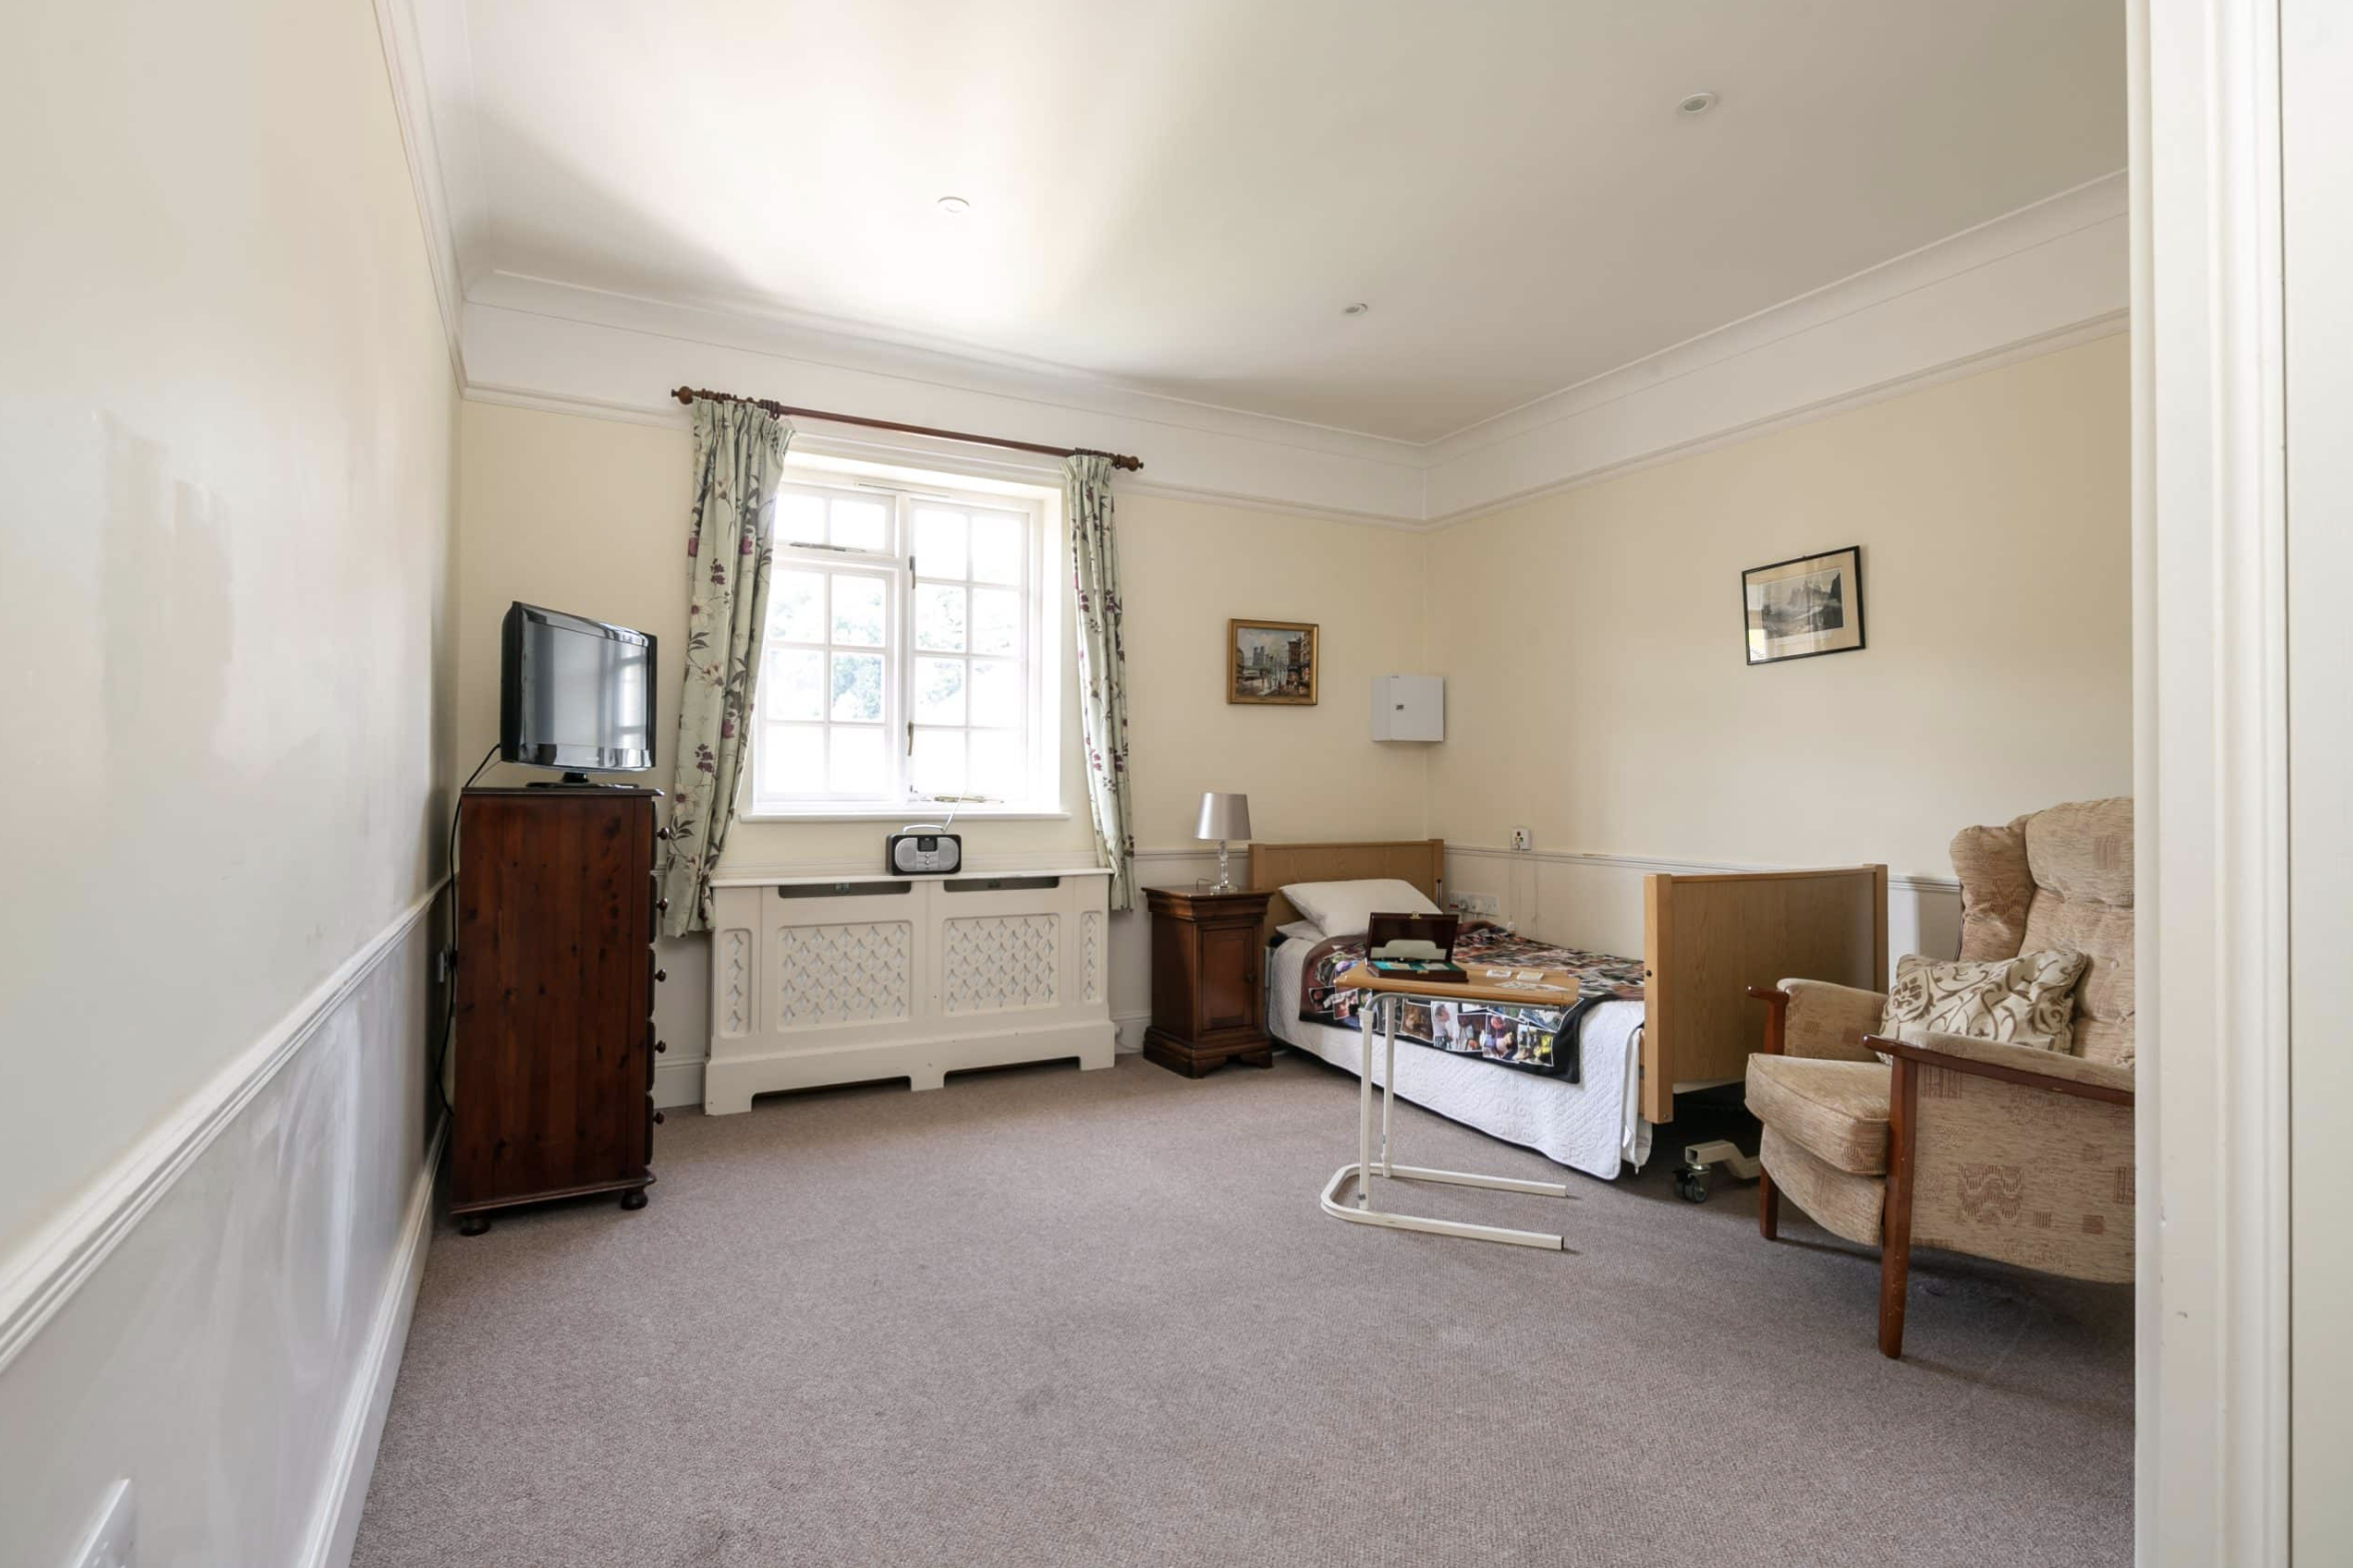 Bedroom of Birtley House care home in Guildford, Surrey